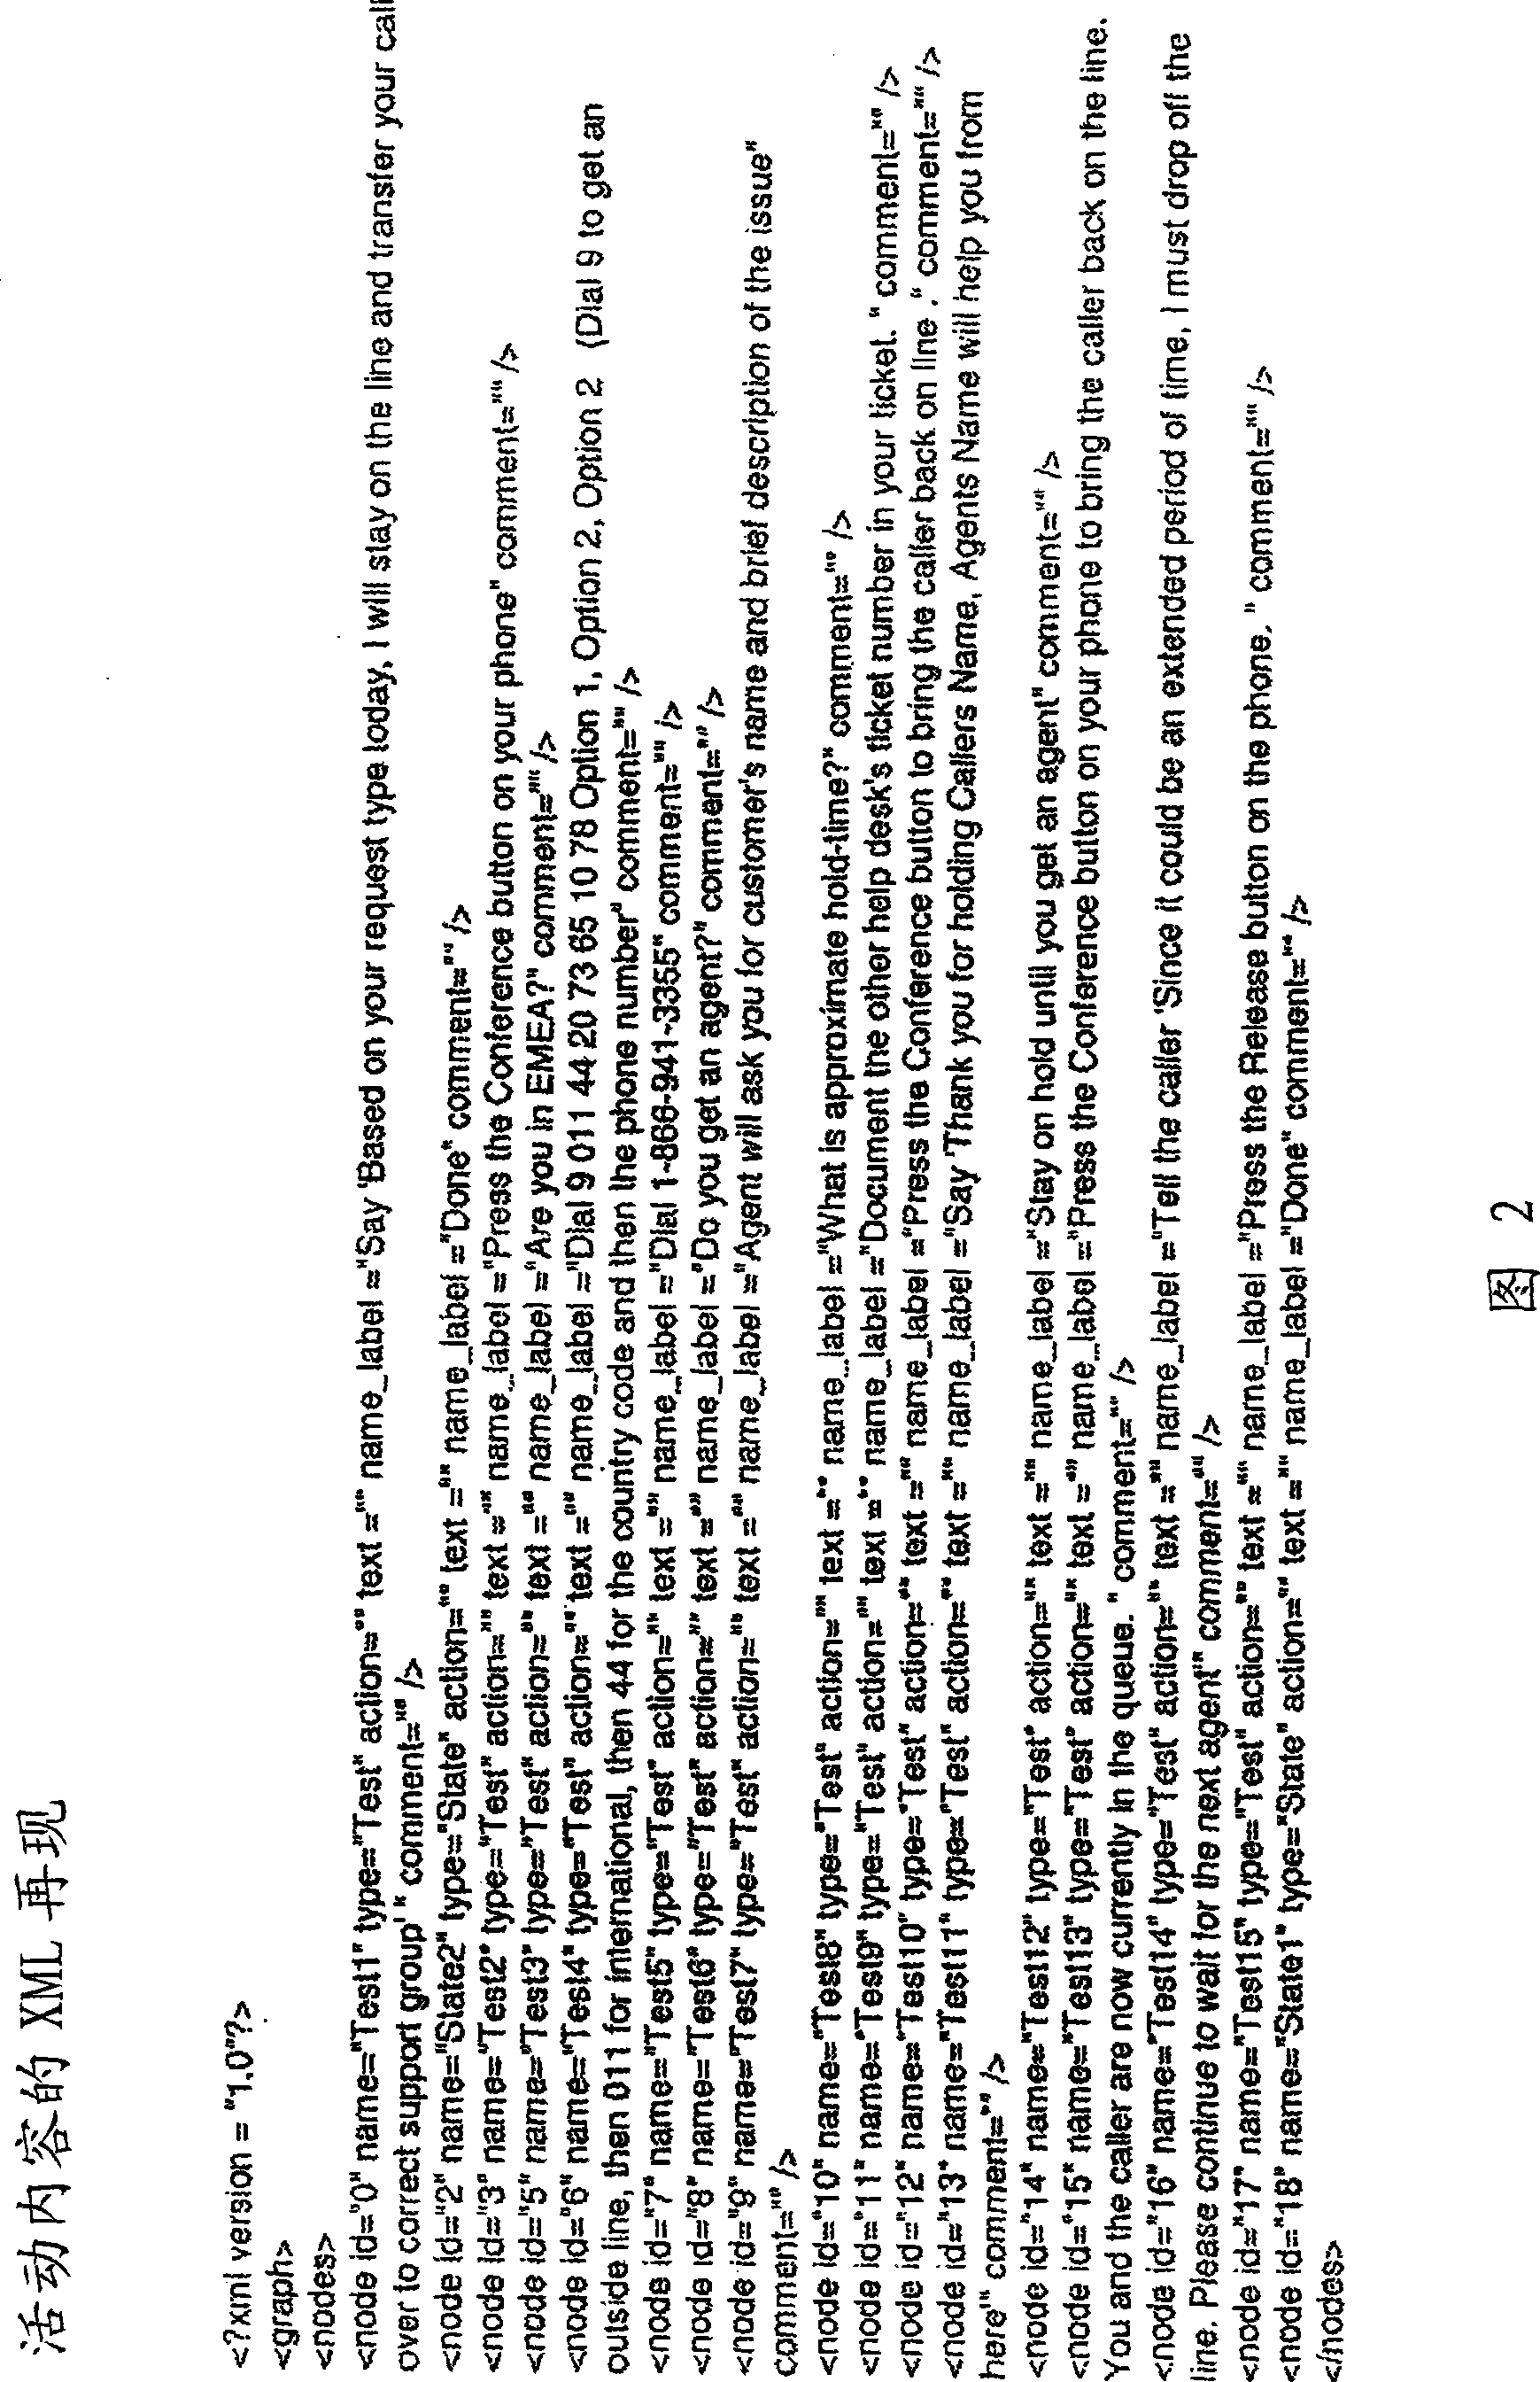 System and method for creating, executing and searching through a form of active web-based content